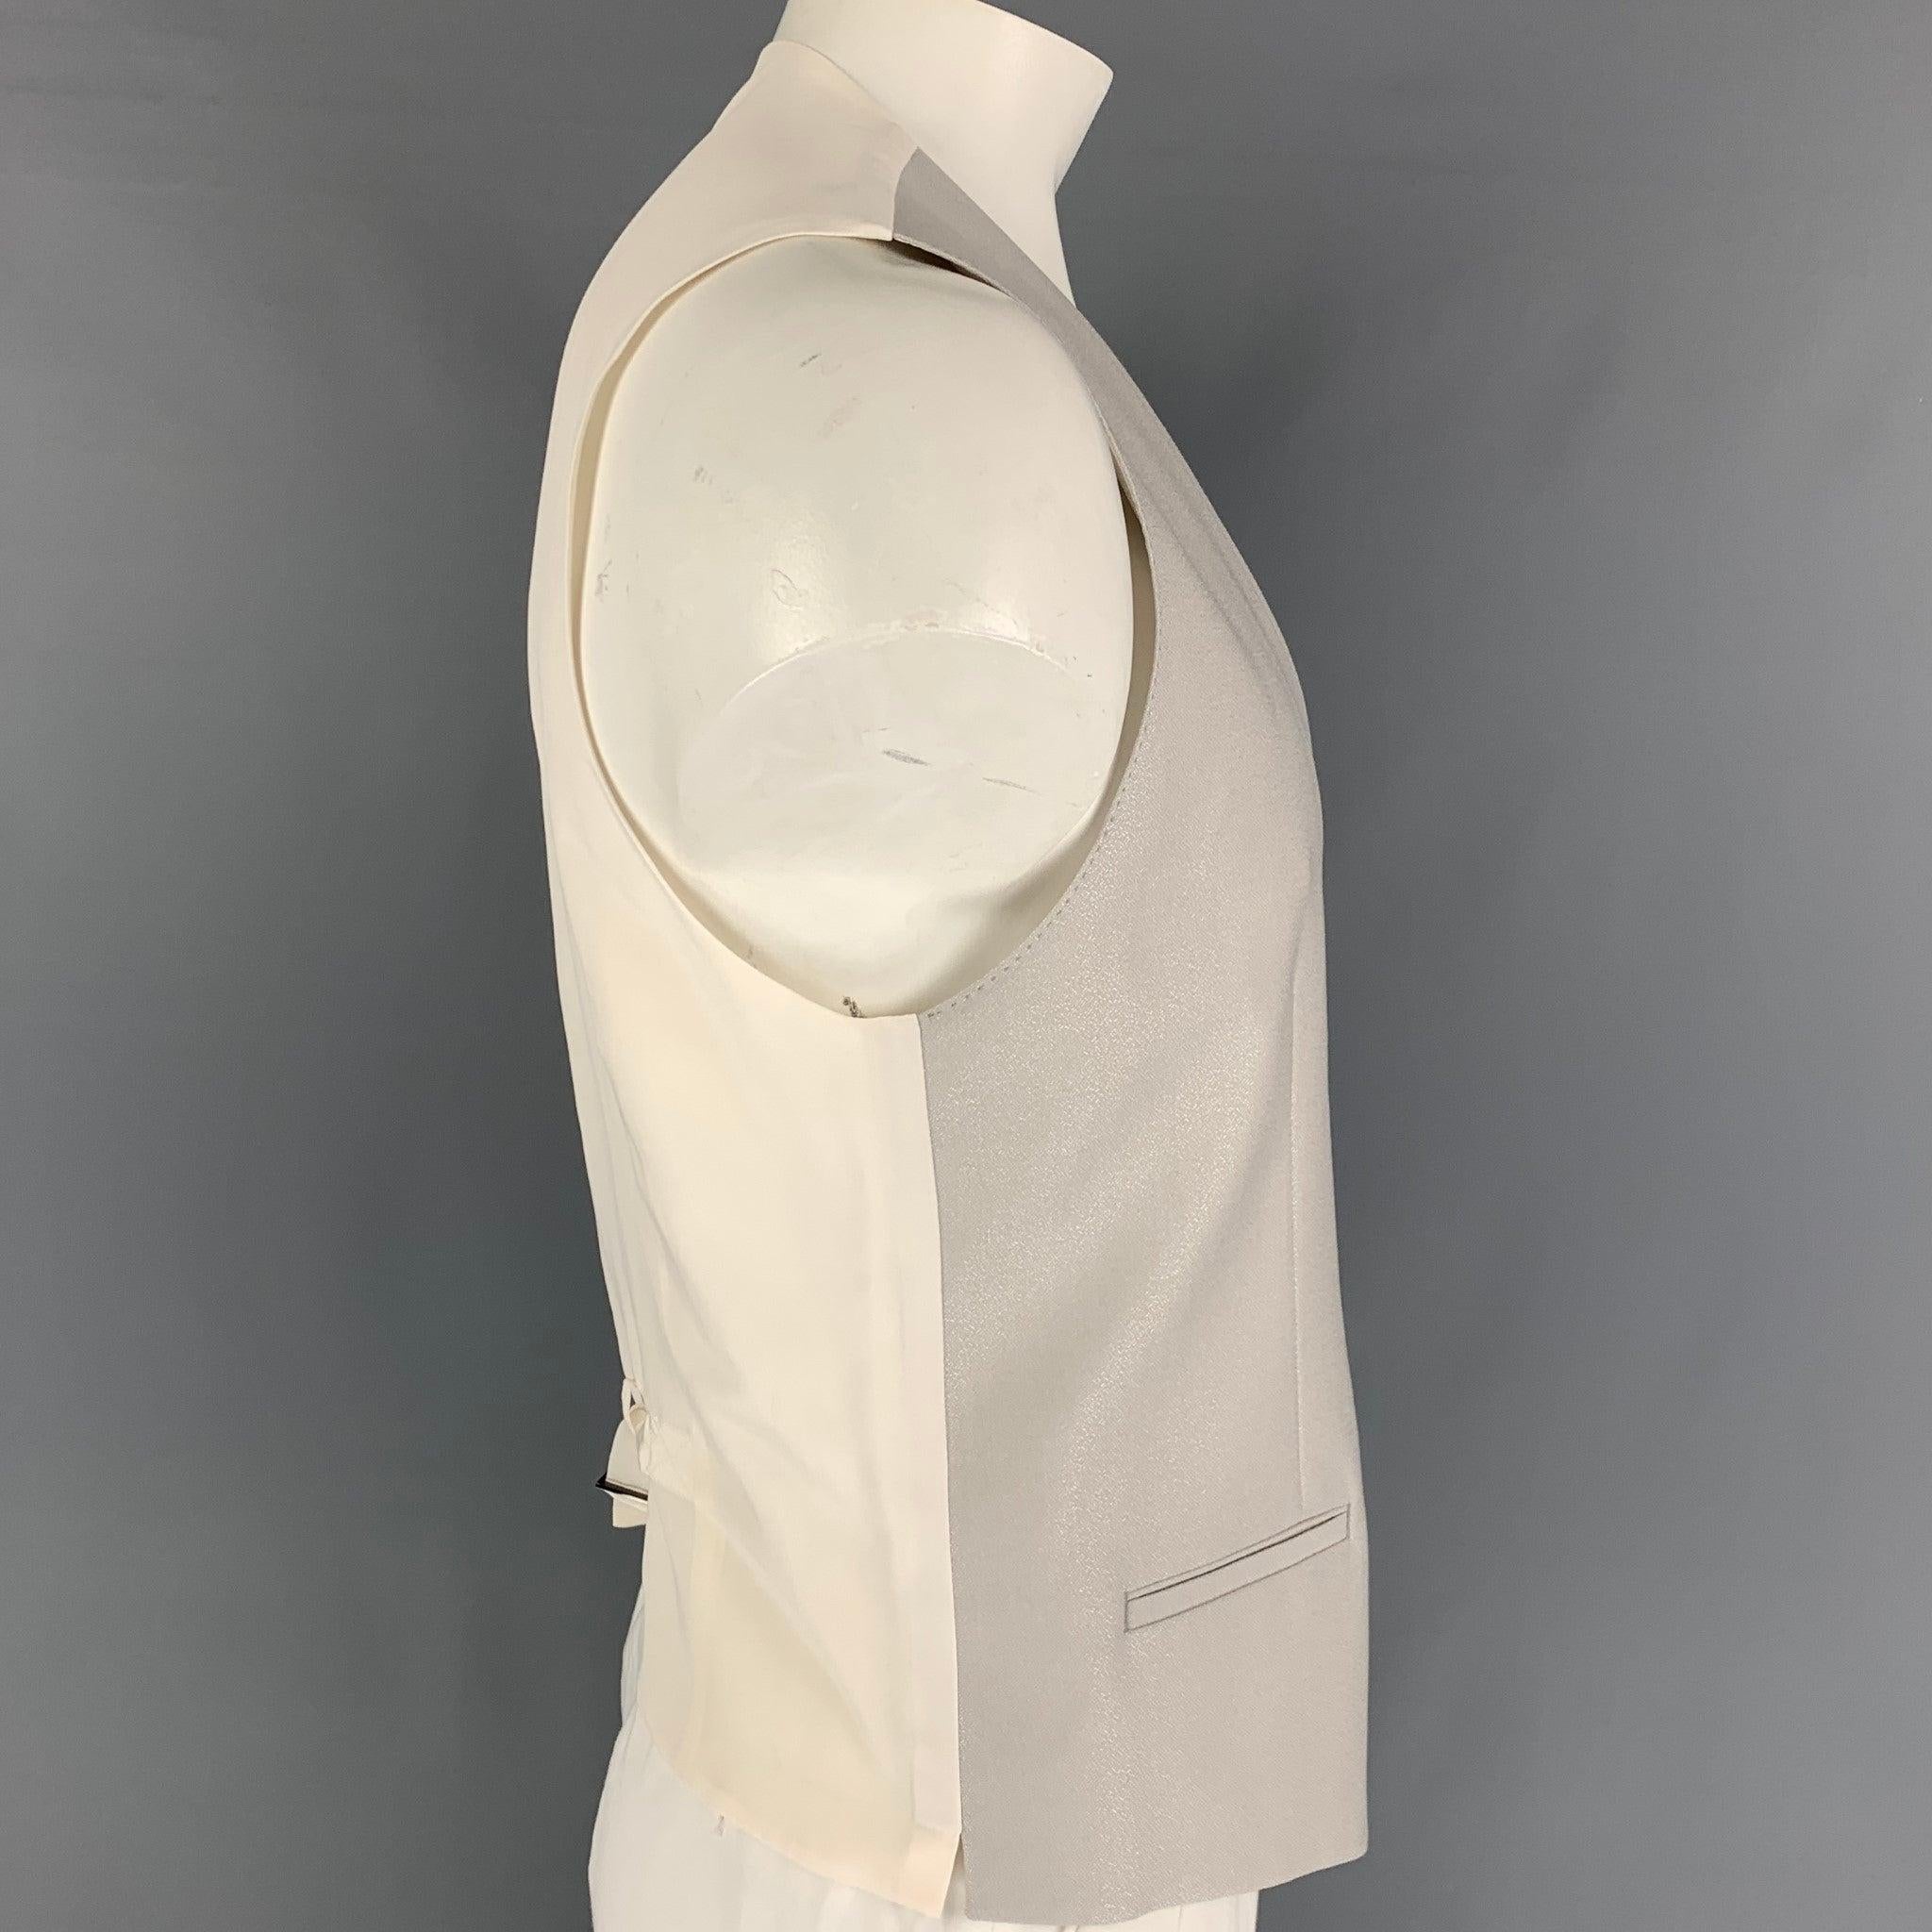 DOLCE & GABBANA
dress vest comes in a silver & beige wool / silk featuring a back belt, front pockets, and a buttoned closure.
Very Good
Pre-Owned Condition. 

Marked:   52 

Measurements: 
 
Shoulder: 15 inches  Chest: 42 inches  Length: 24 inches